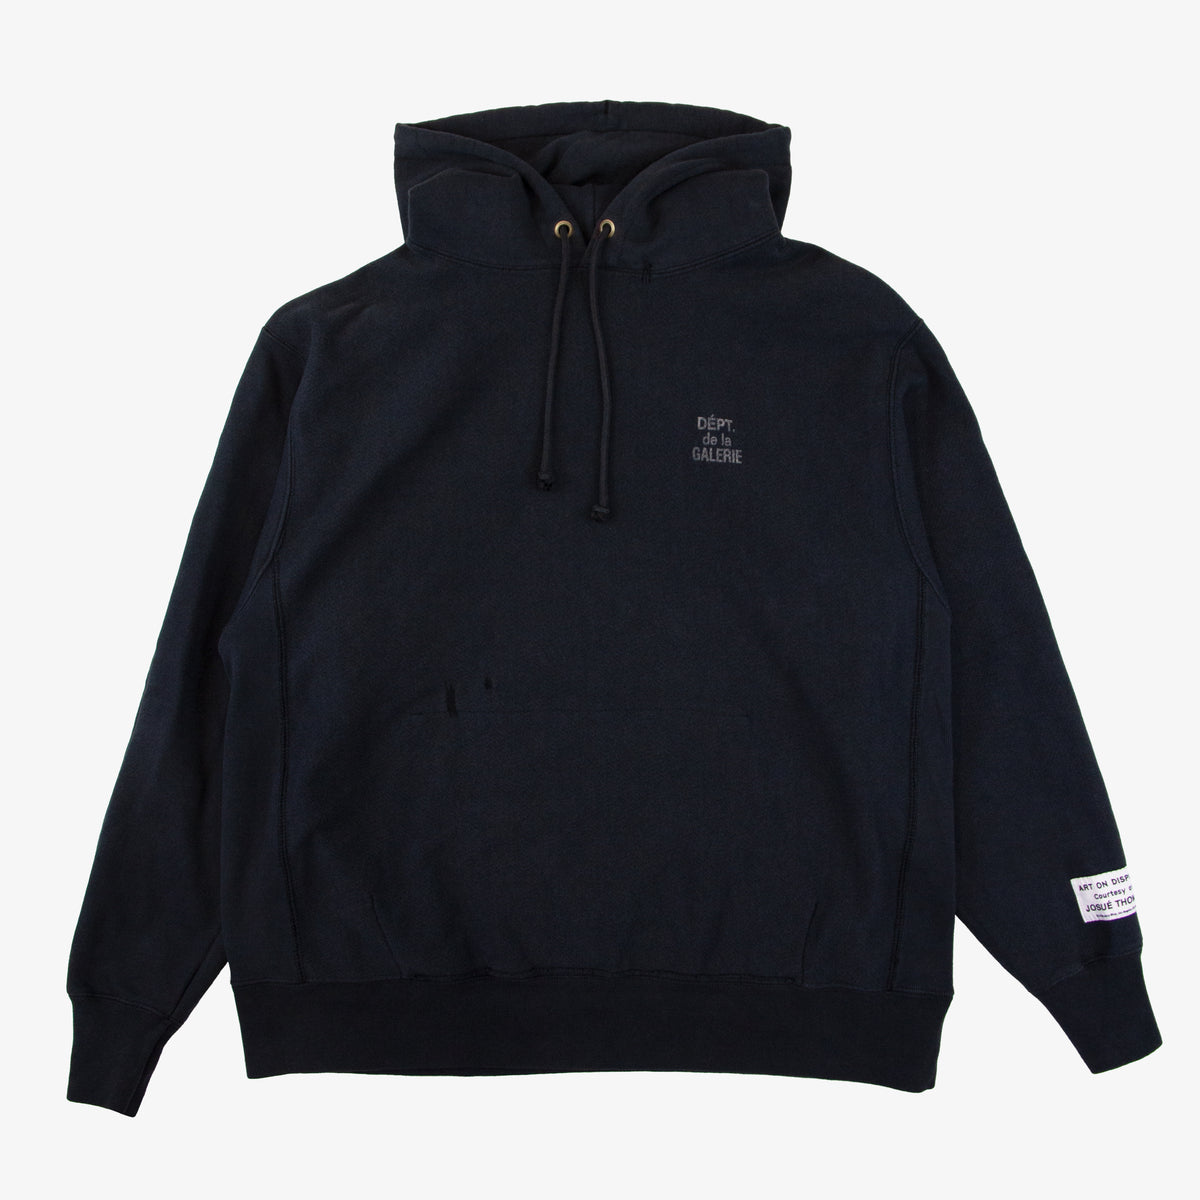 INSIDE OUT FRENCH LOGO HOODIE – OBTAIND